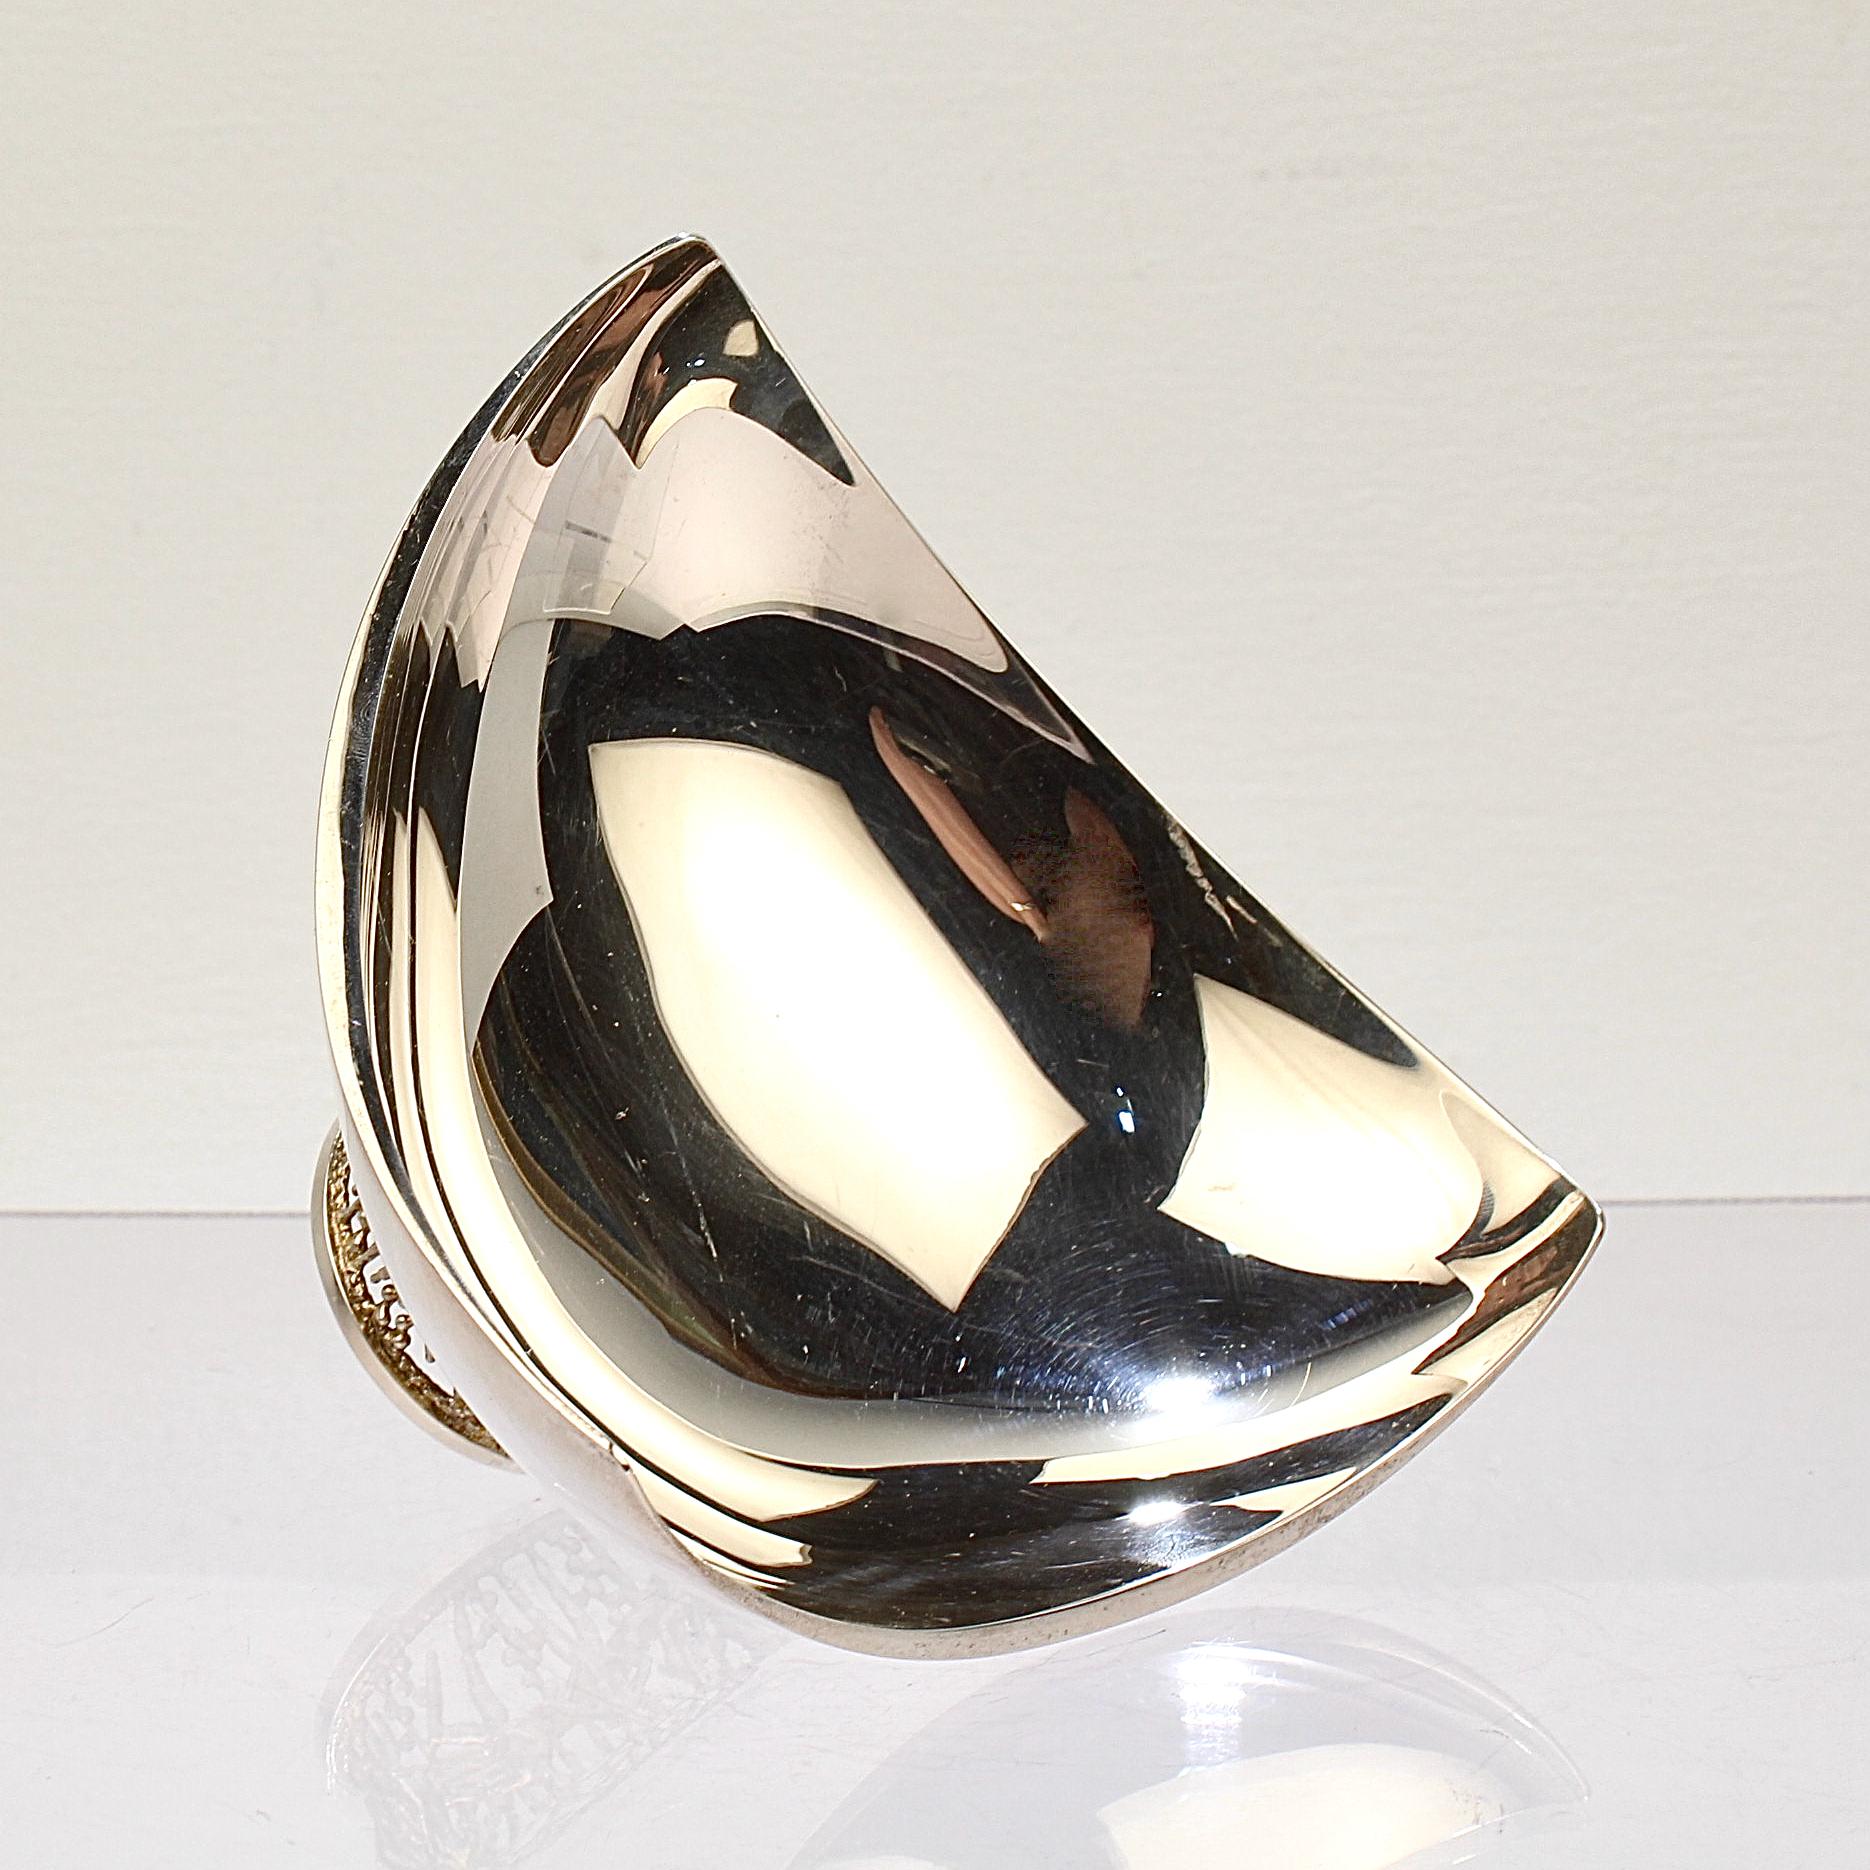 English 1980's Modernist Caryatic Sterling Silver Bowl by Stuart Devlin For Sale 4